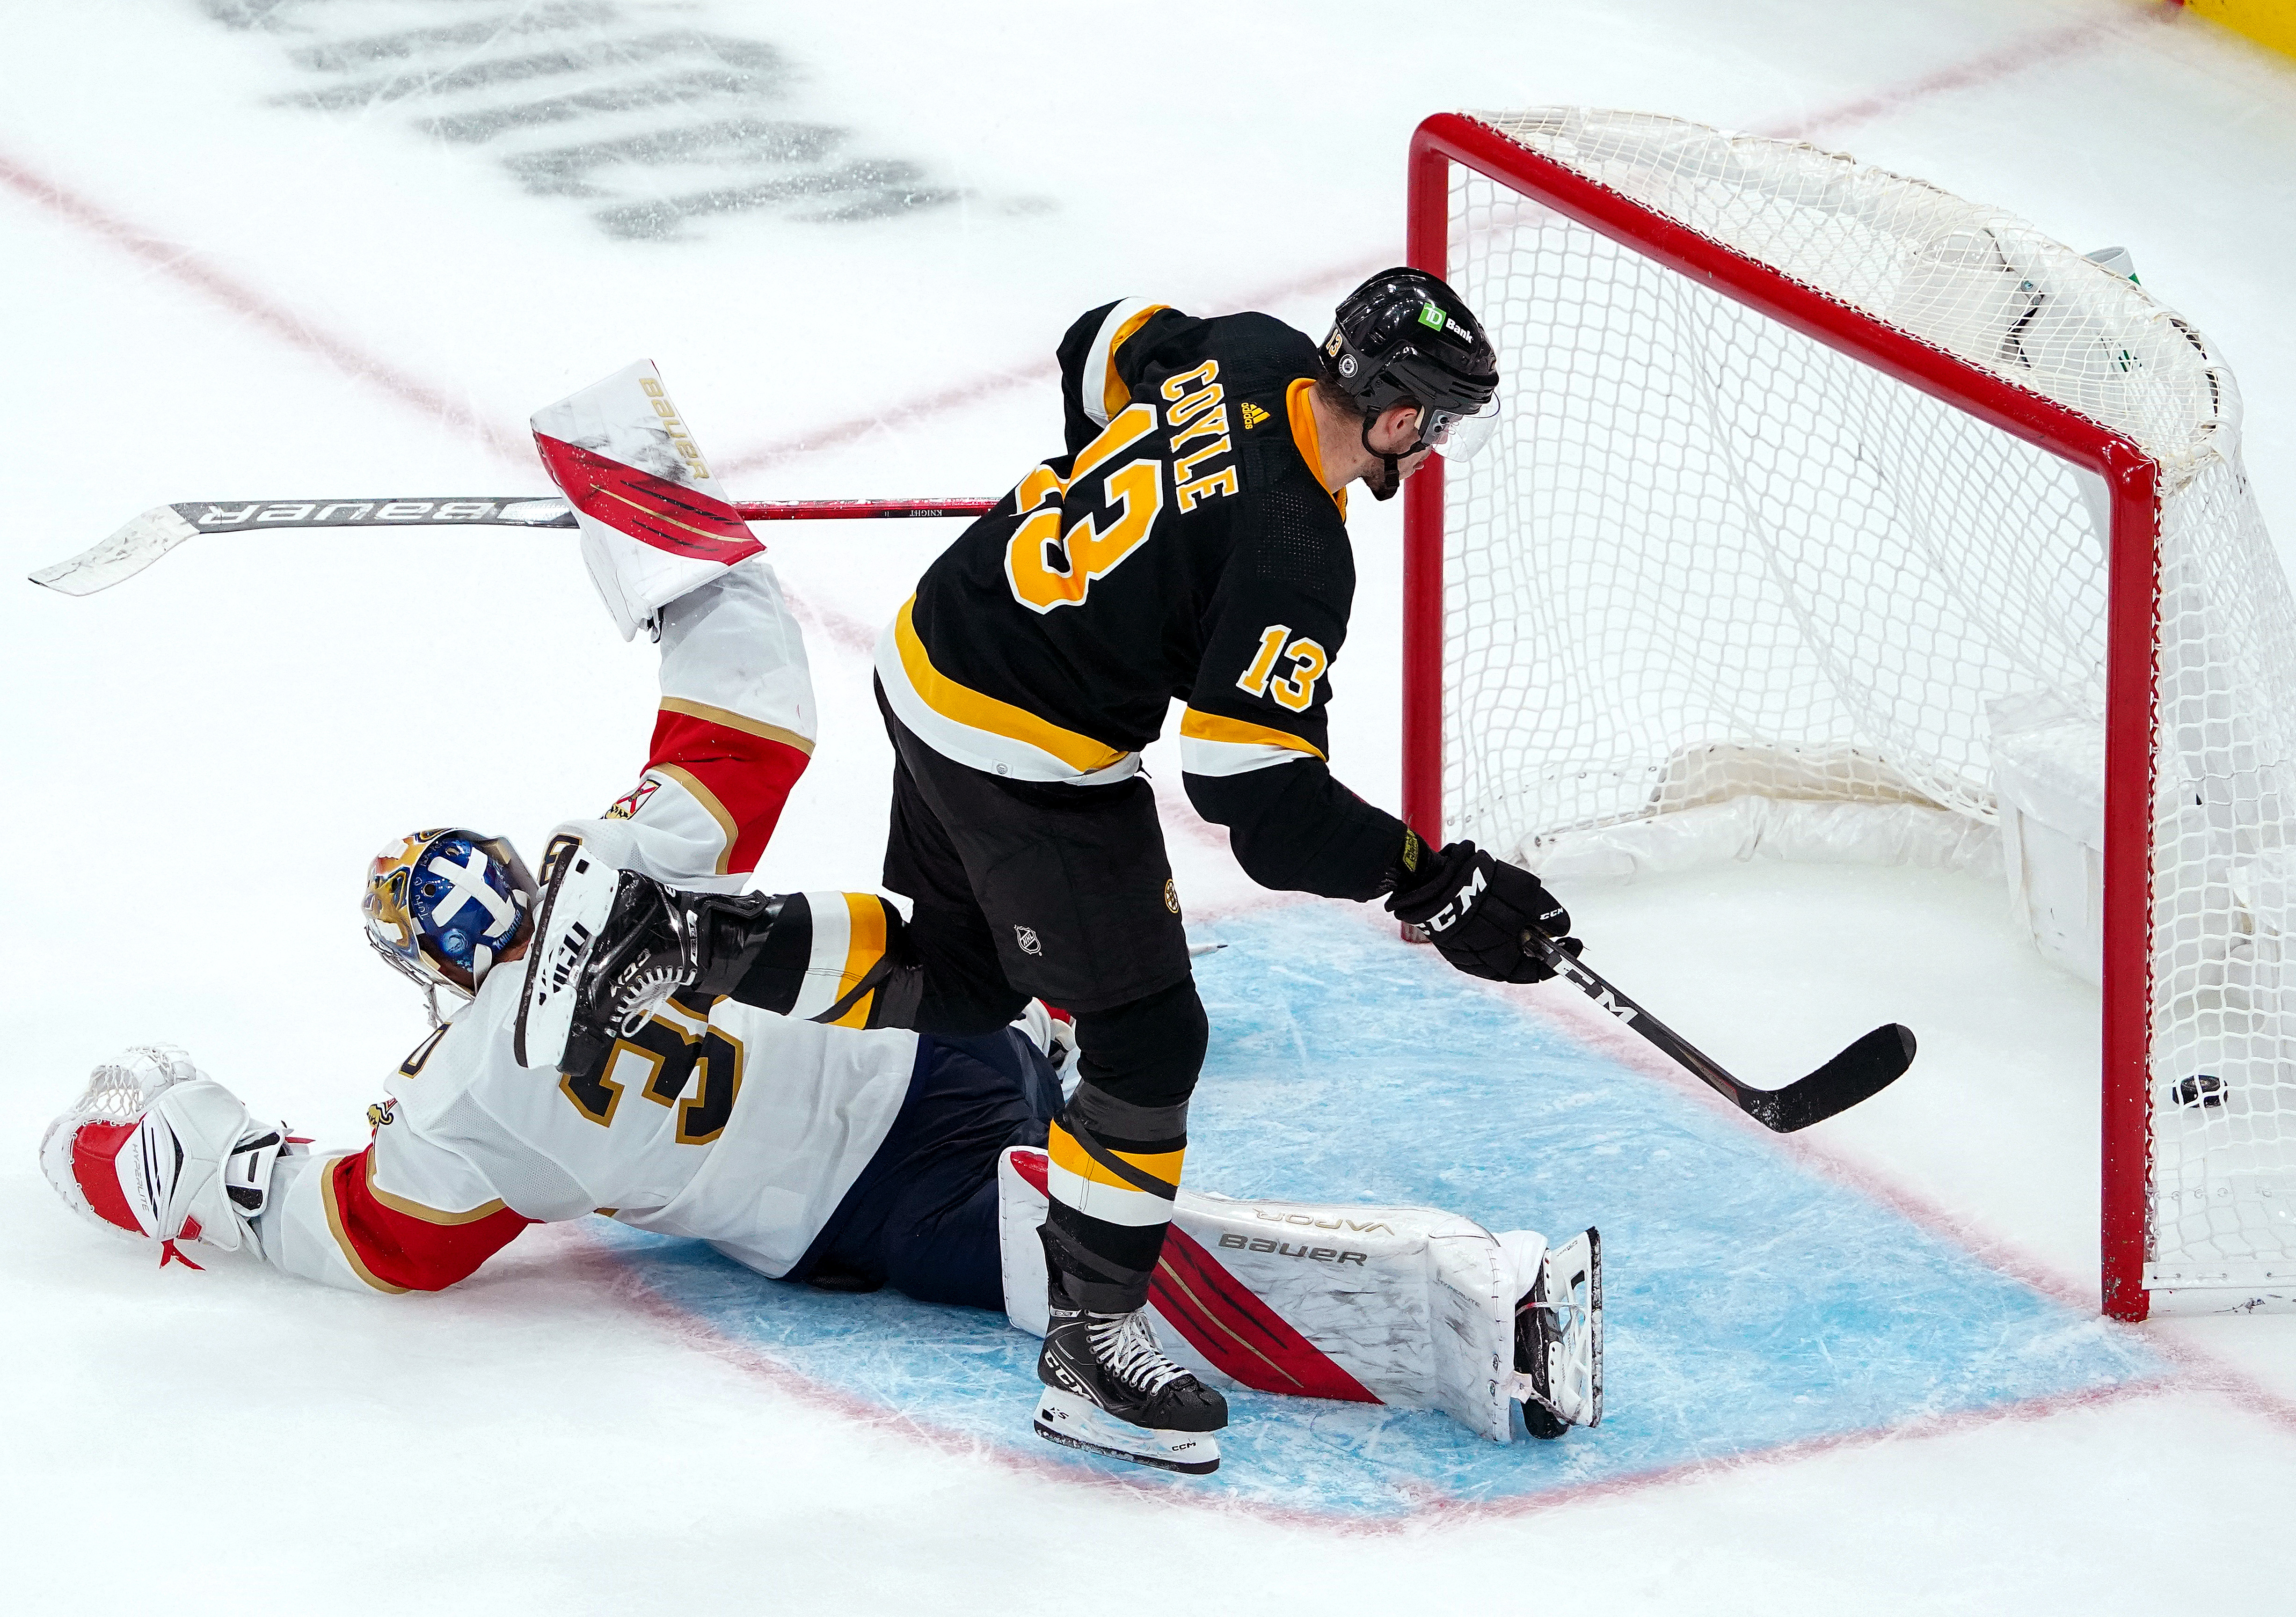 Coyle takes center stage for undermanned Bruins in Game 3 win